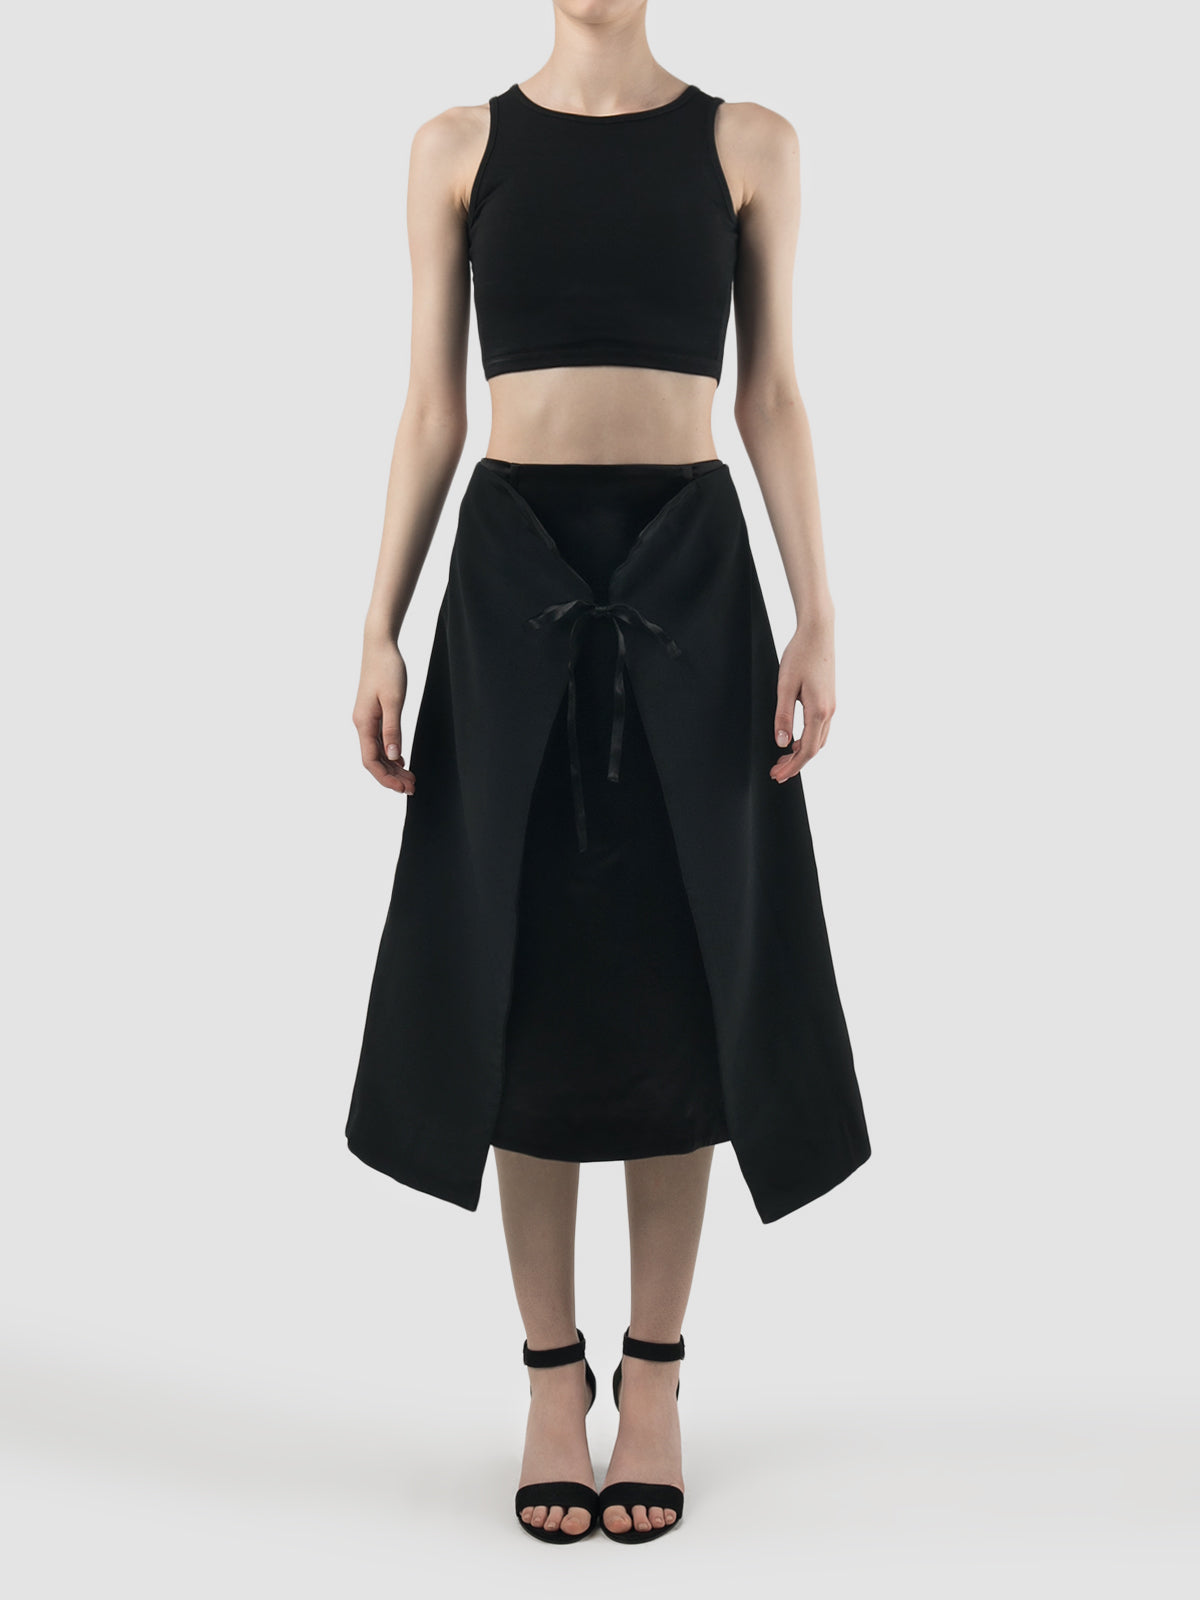 Black double-layered skirt with gold embroidery